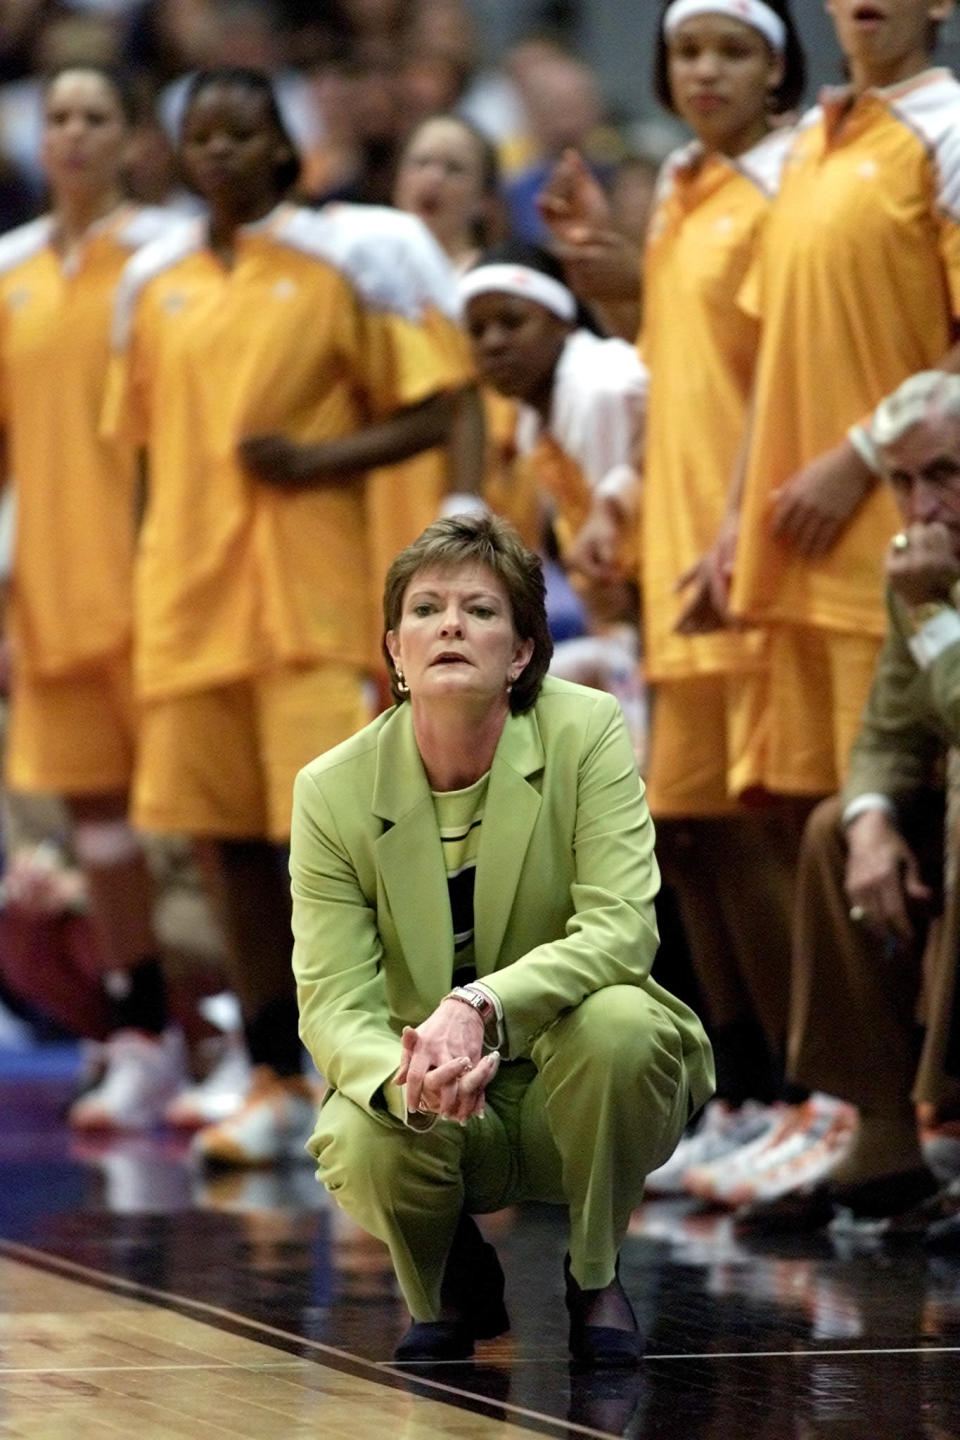 Tennessee Lady Vols head coach Pat Summitt watches her team lose to the University of Connecticut at the 2002 NCAA Women's Final Four semifinals in San Antonio, Texas, March 29, 2002. Connecticut defeated Tennessee 79-56. REUTERS/Jeff Mitchell